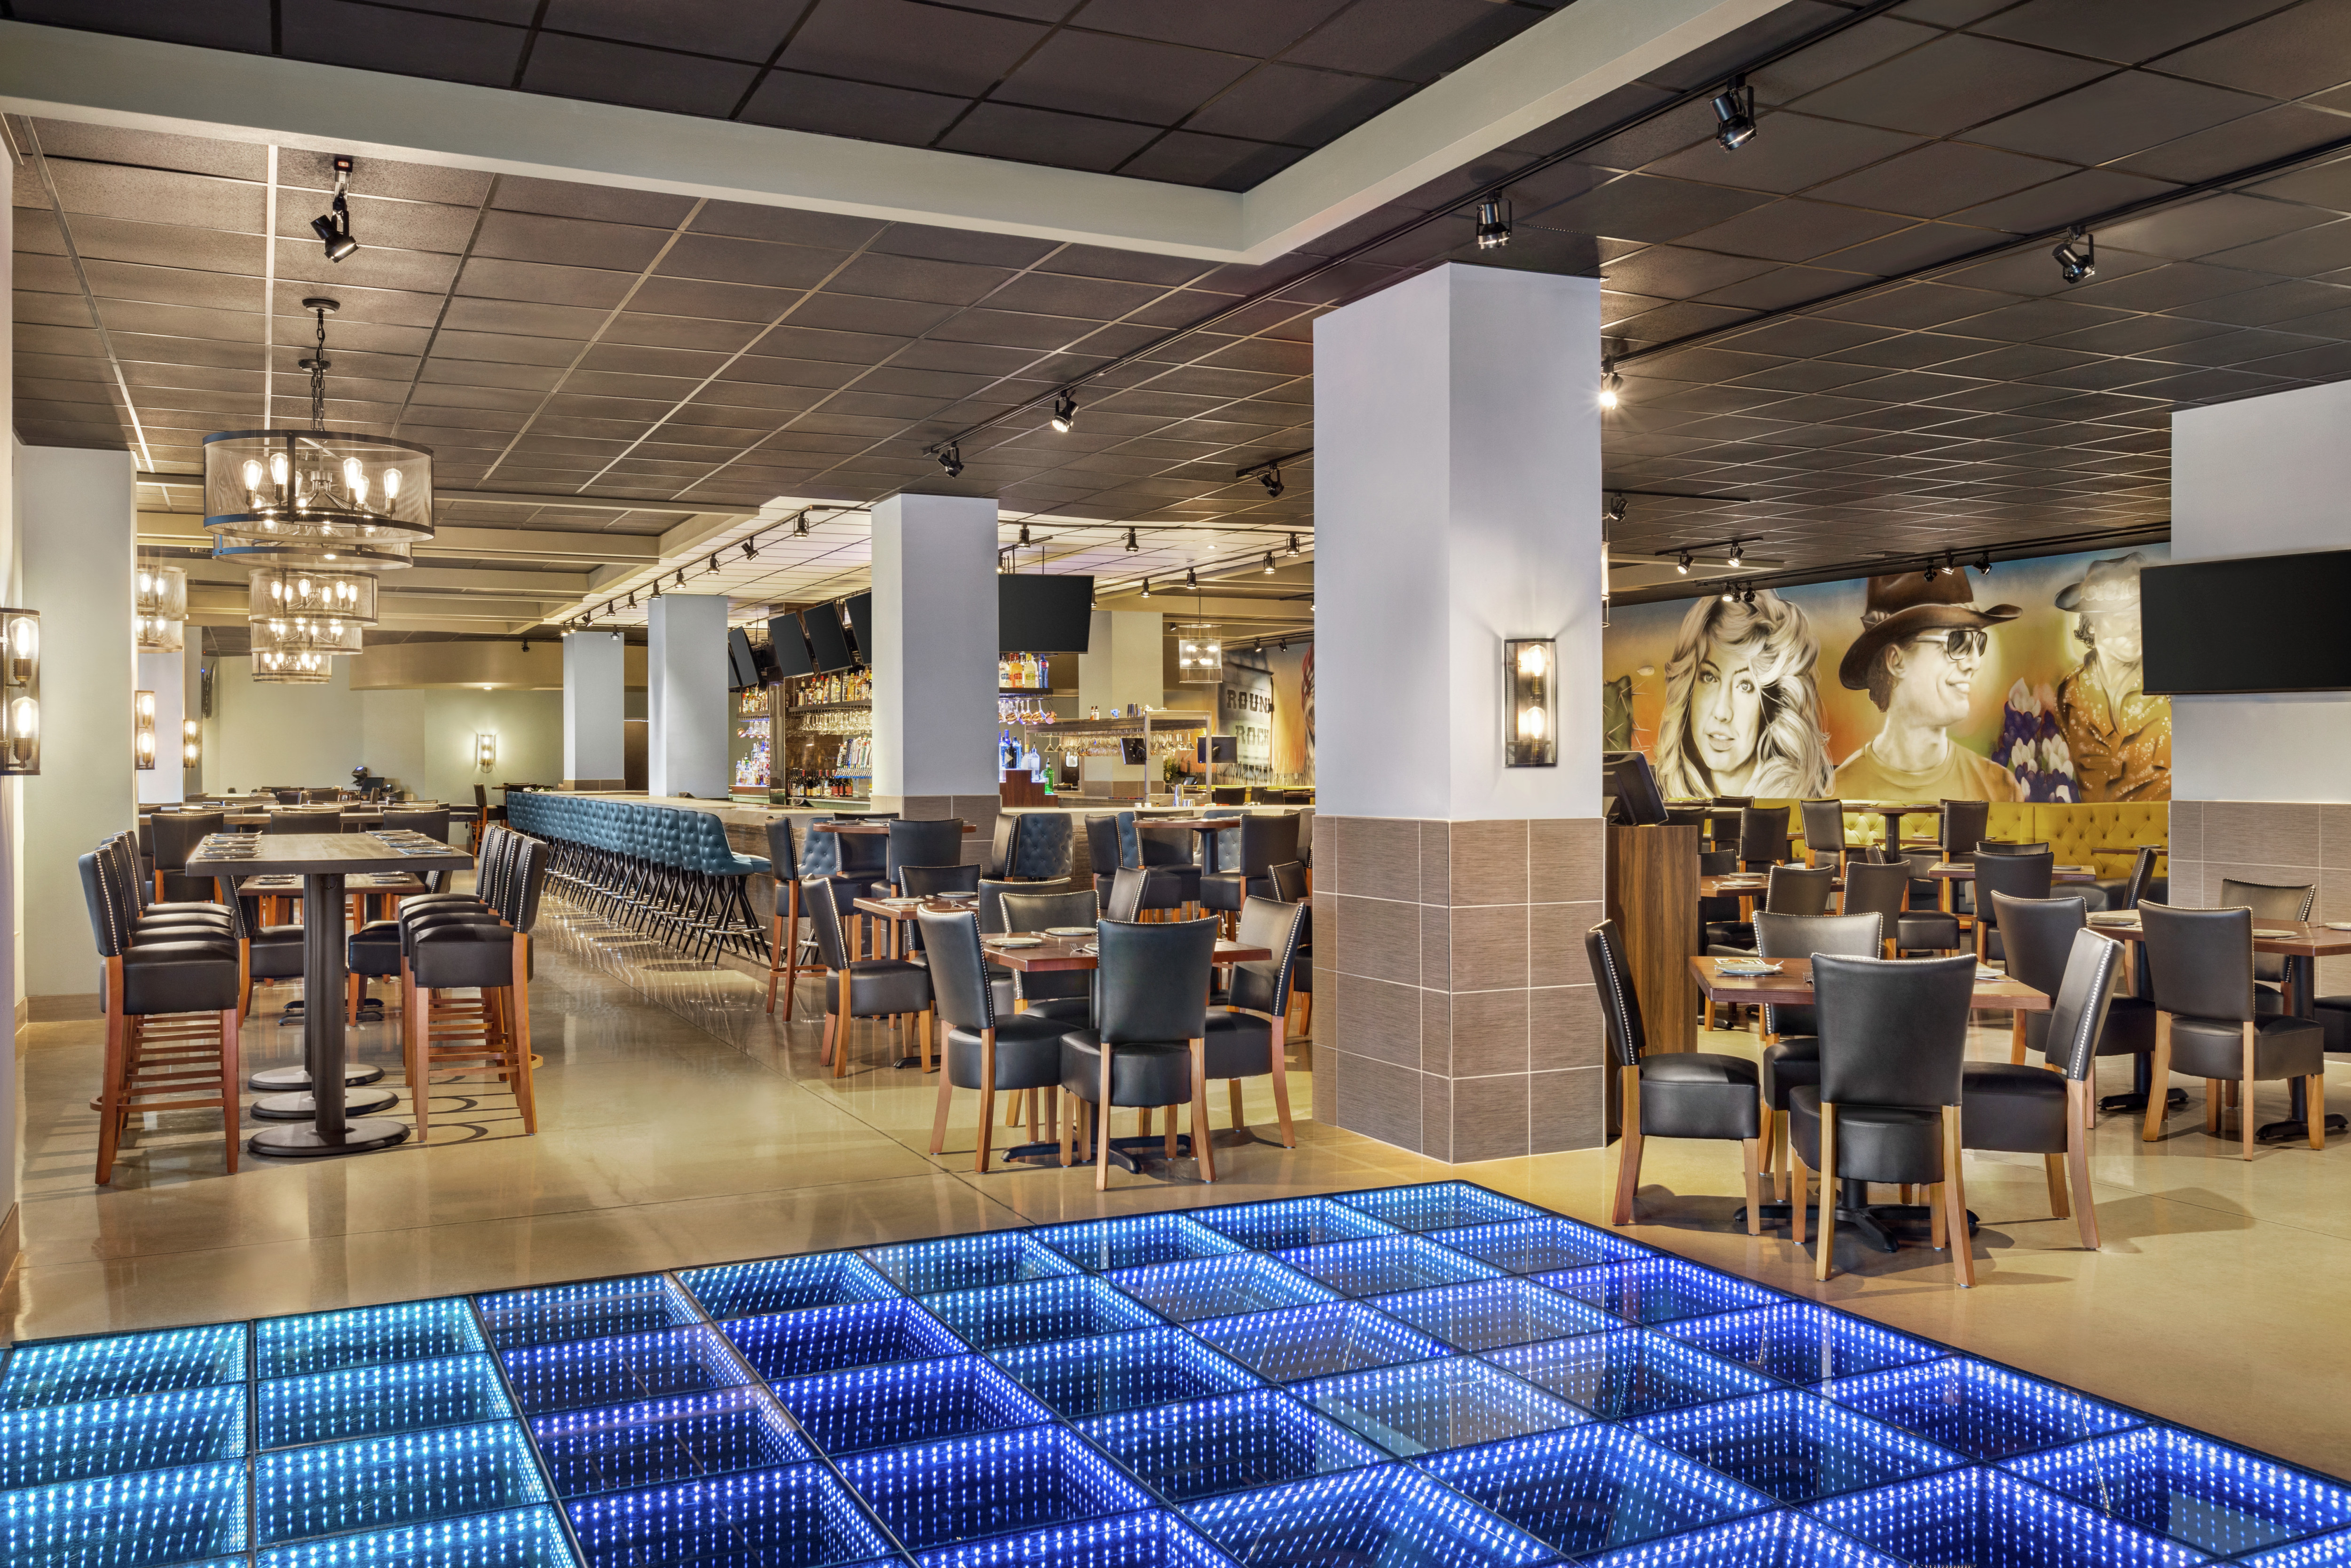 Spacious on-site restaurant and bar featuring fun design, ample seating, and eye catching wall mural.